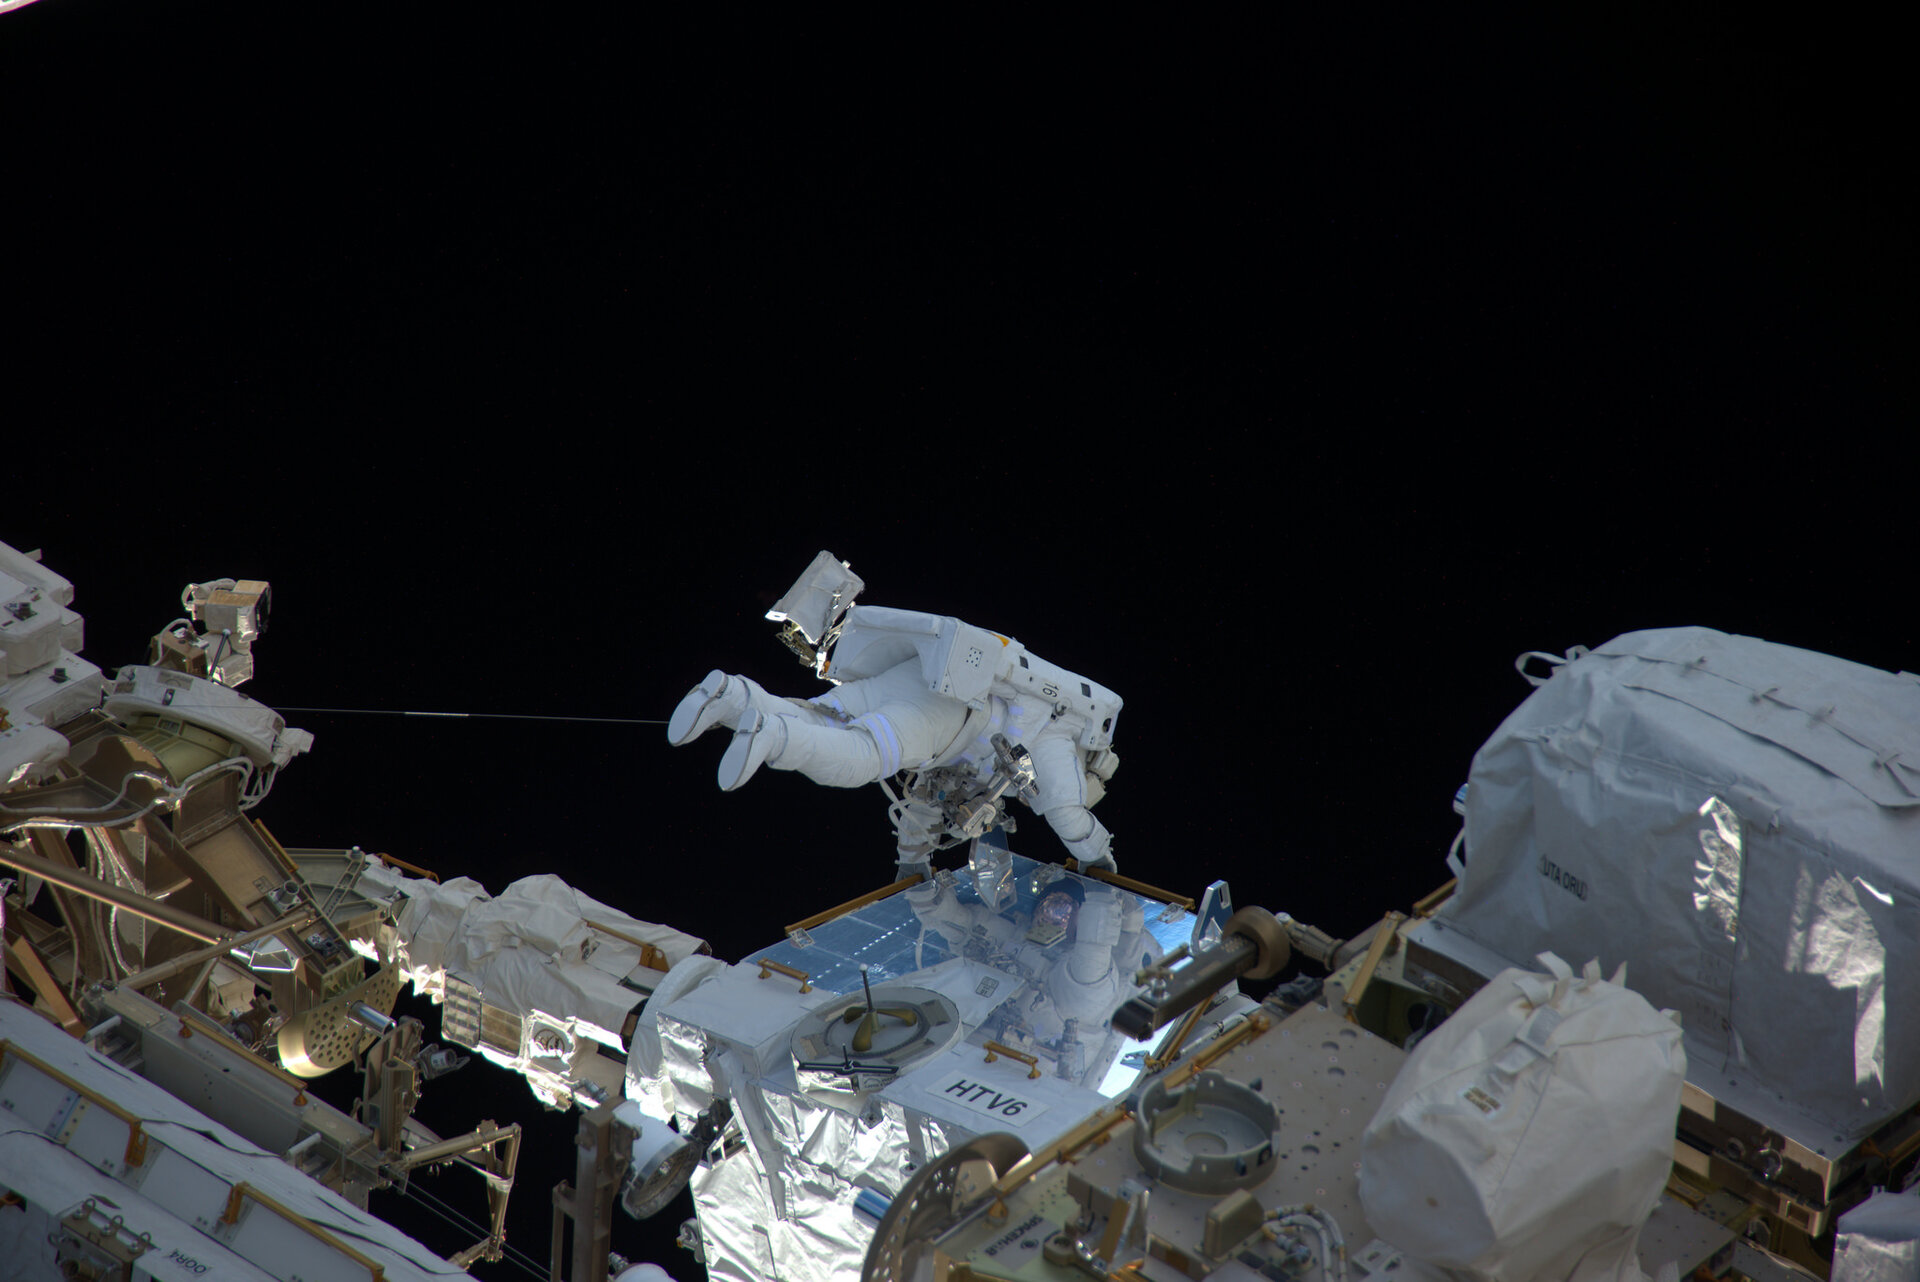 Thomas completing a spacewalk during his mission